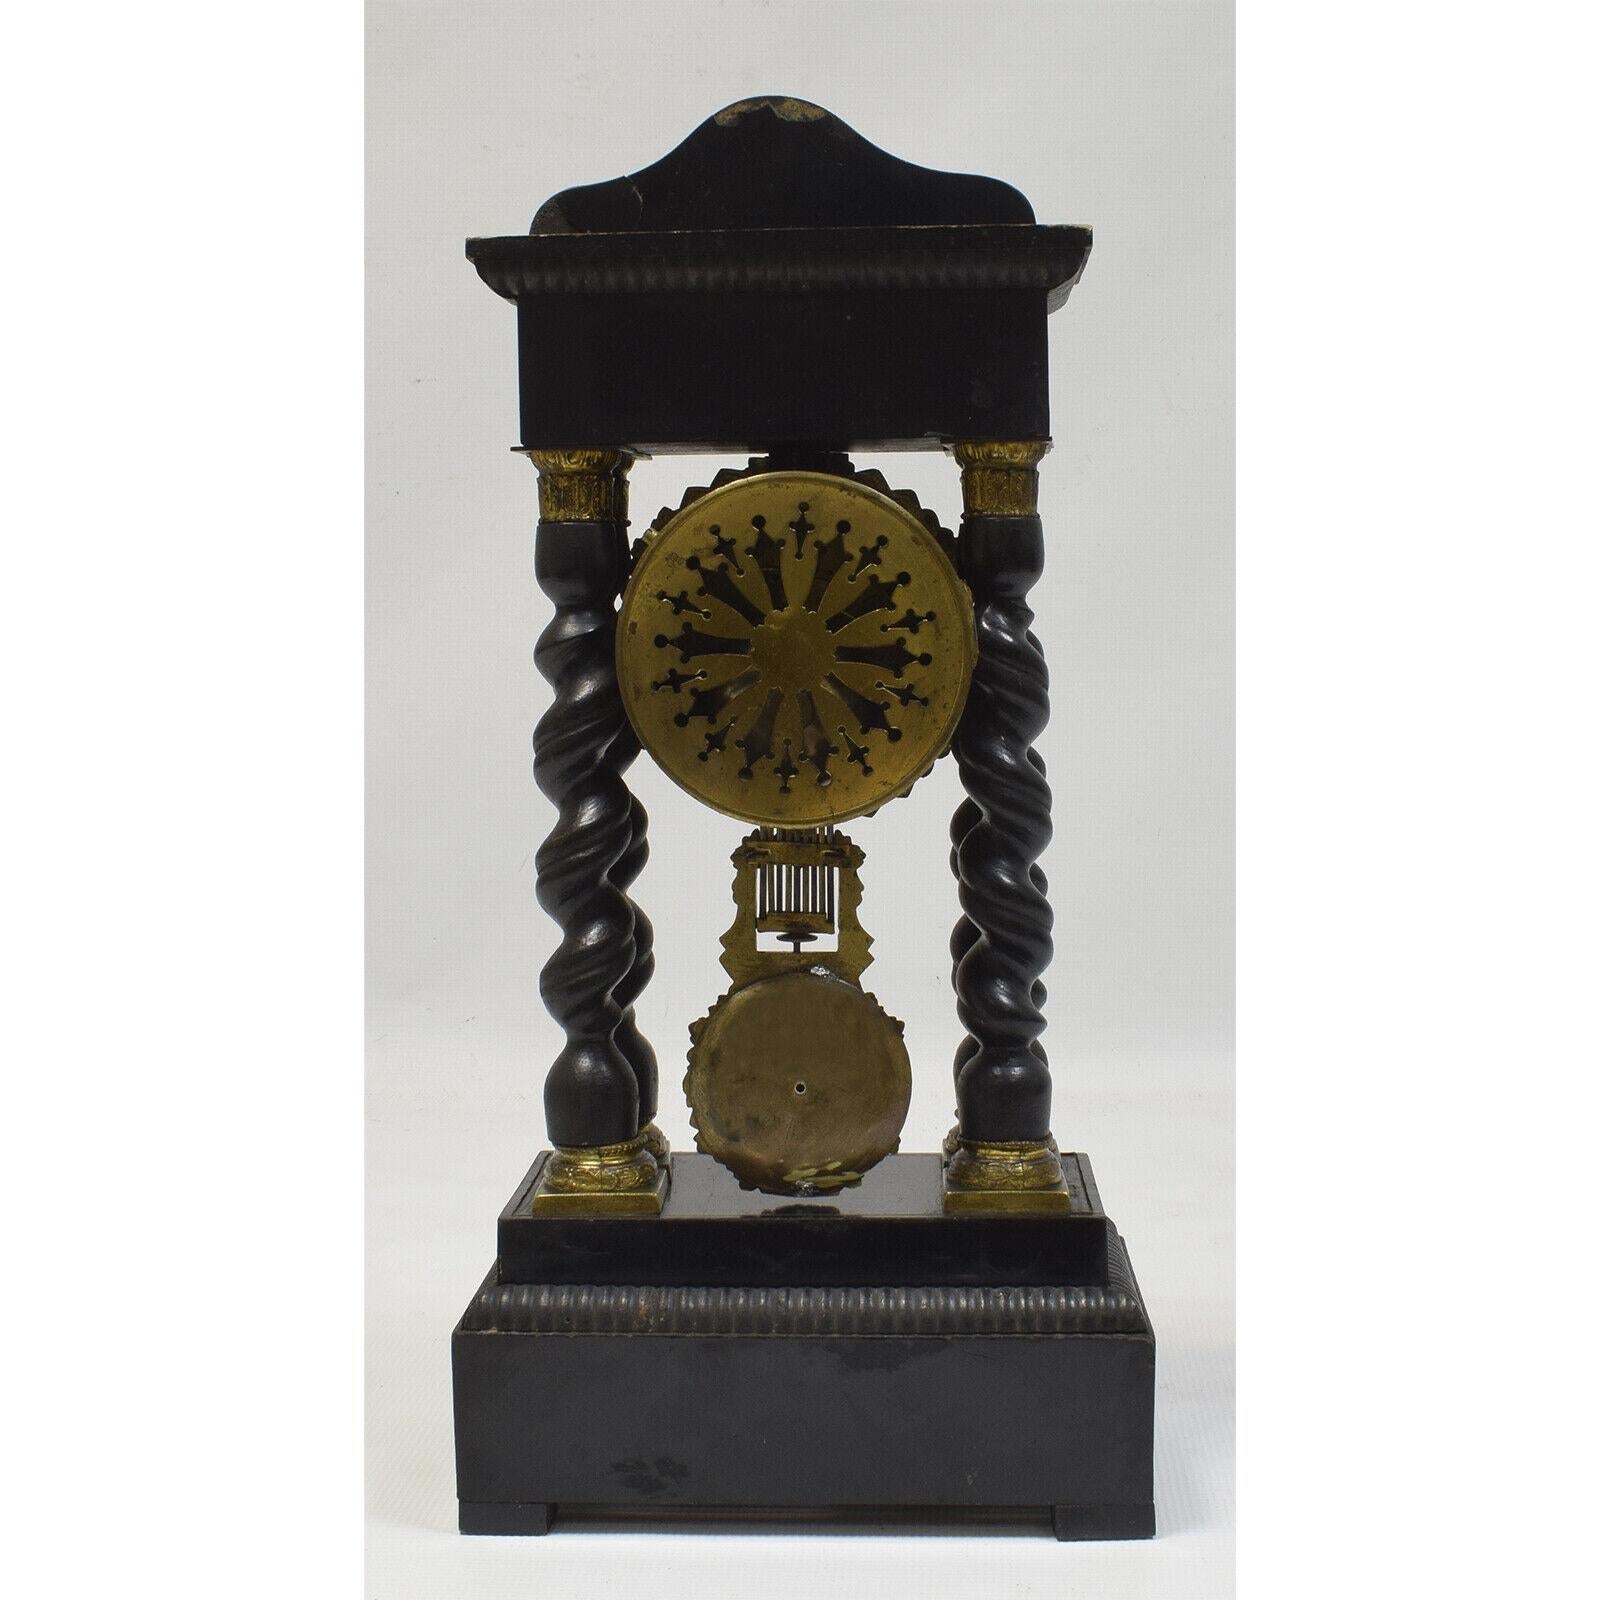 Wood Functional 19th Century S.Marti Column Clock - 46 Cm - 1G06 For Sale